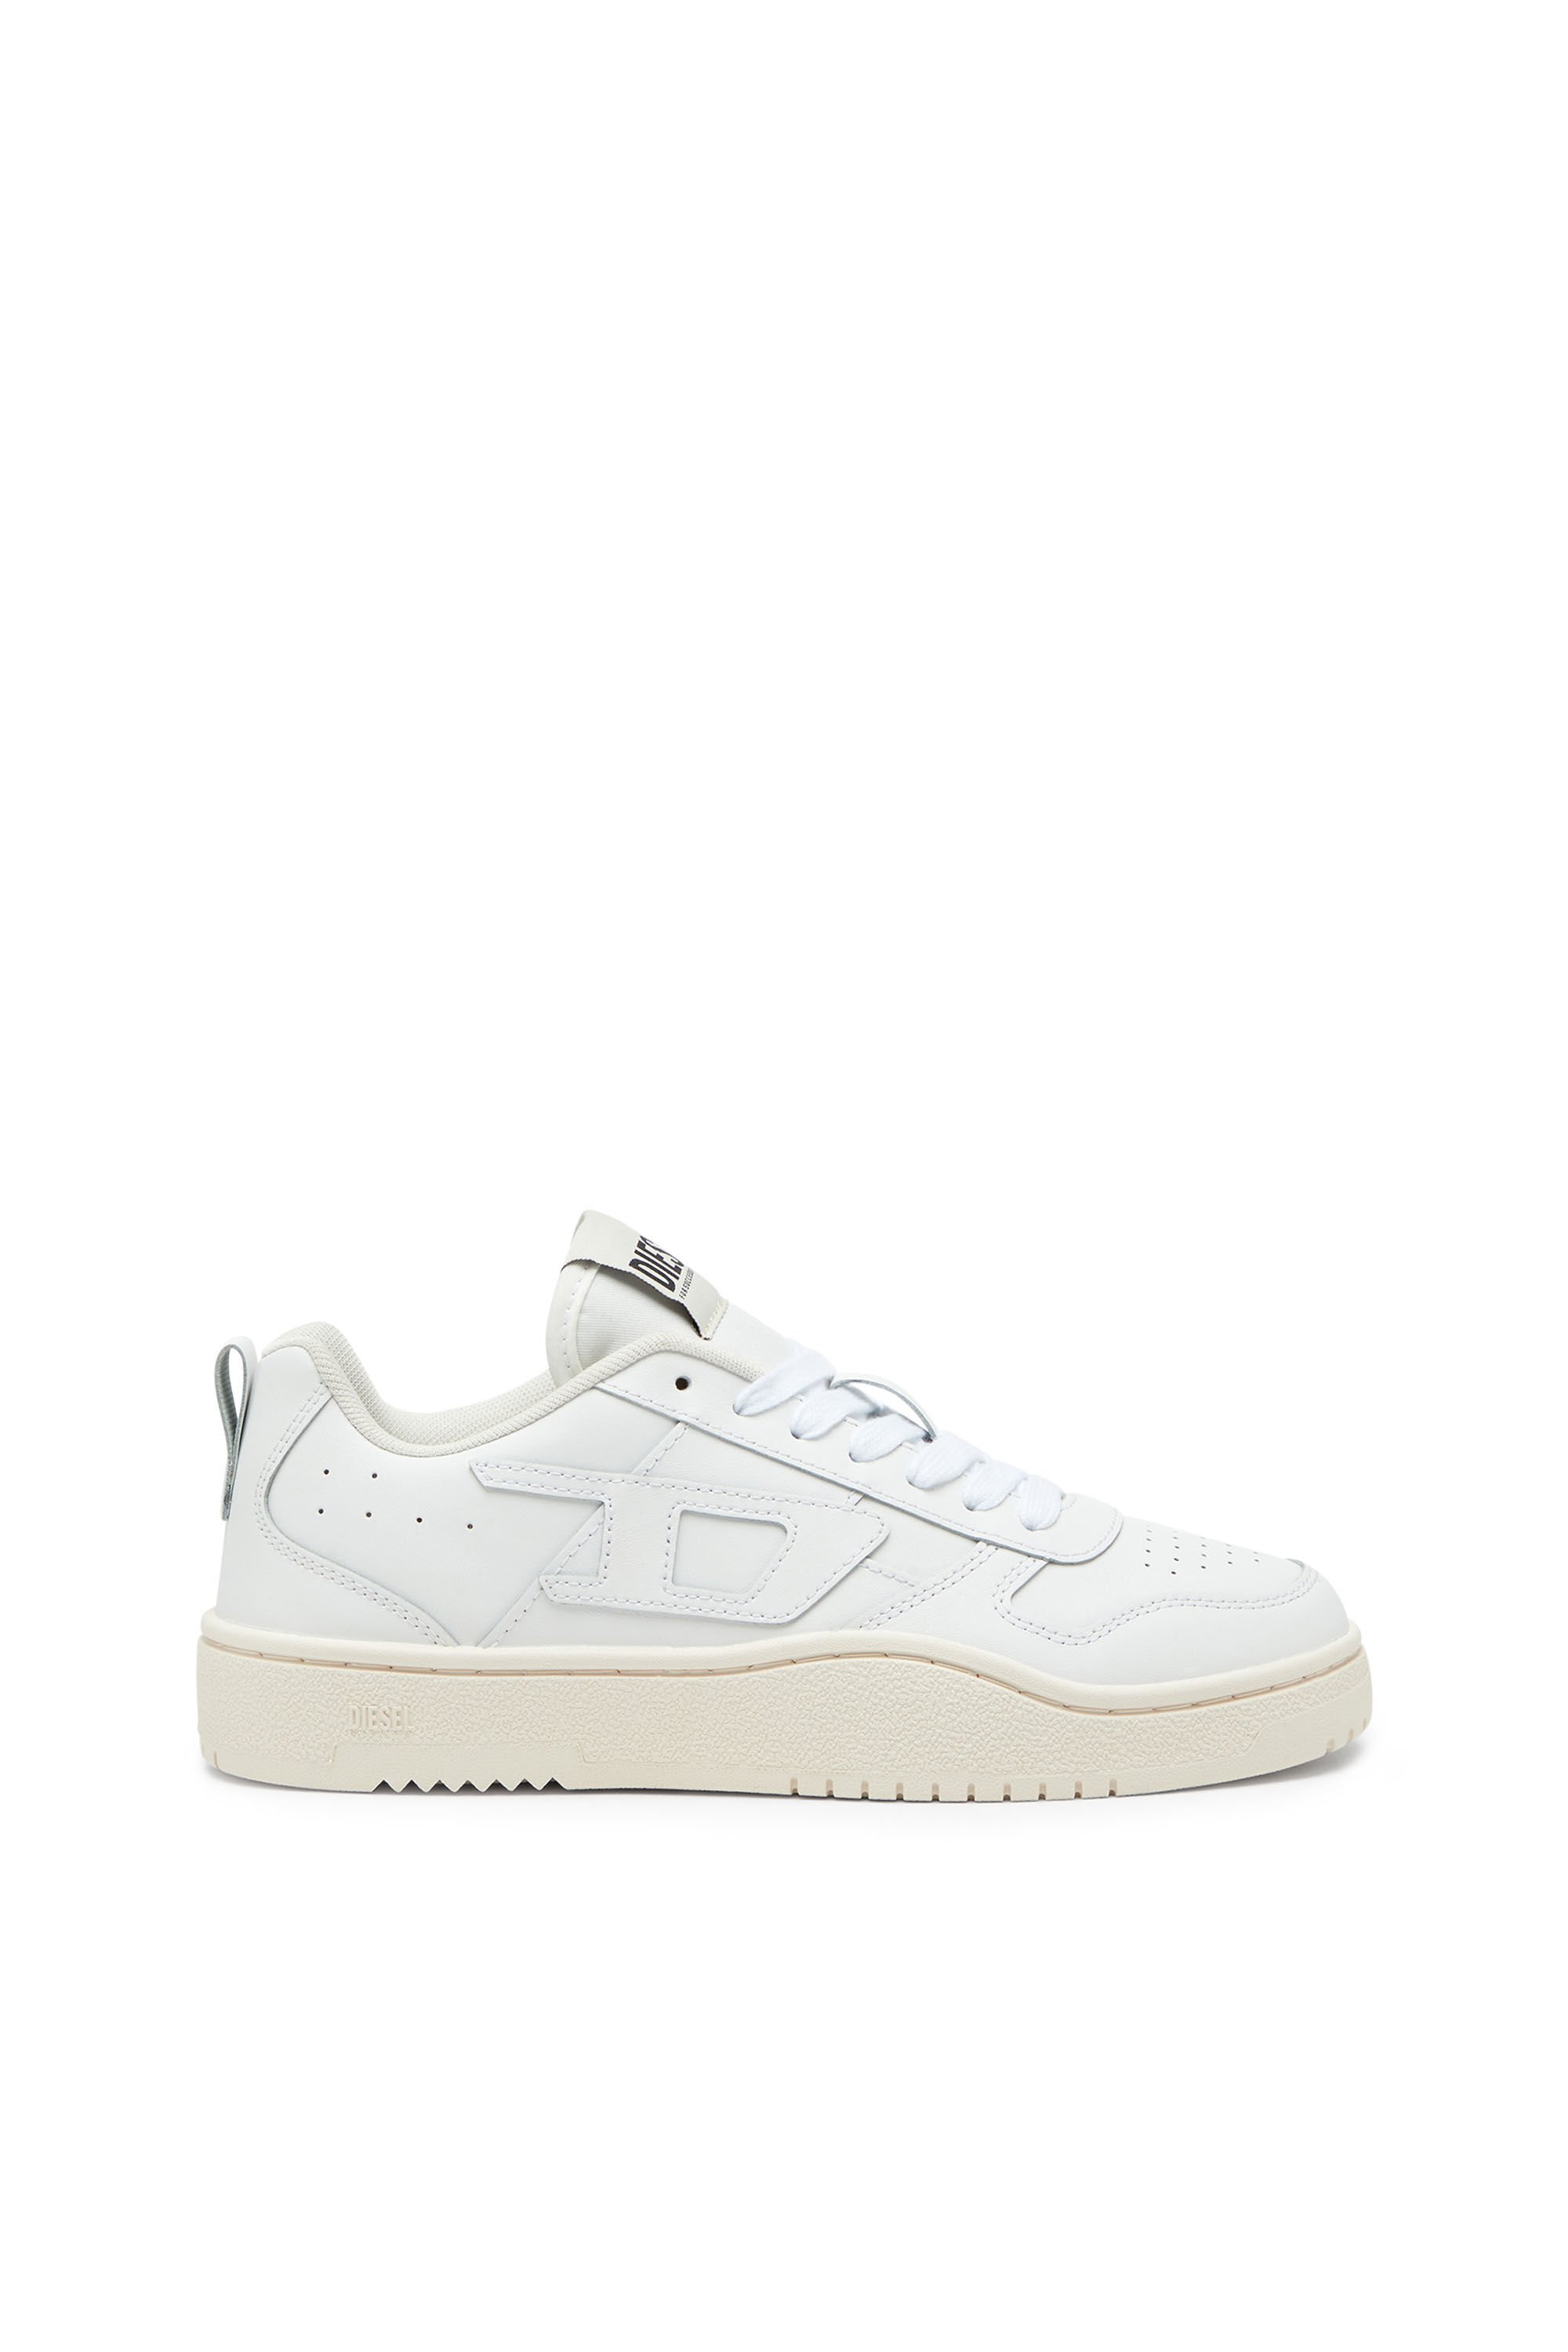 Diesel - S-UKIYO V2 LOW, Man S-Ukiyo Low-Low-top sneakers in leather and nylon in White - Image 1